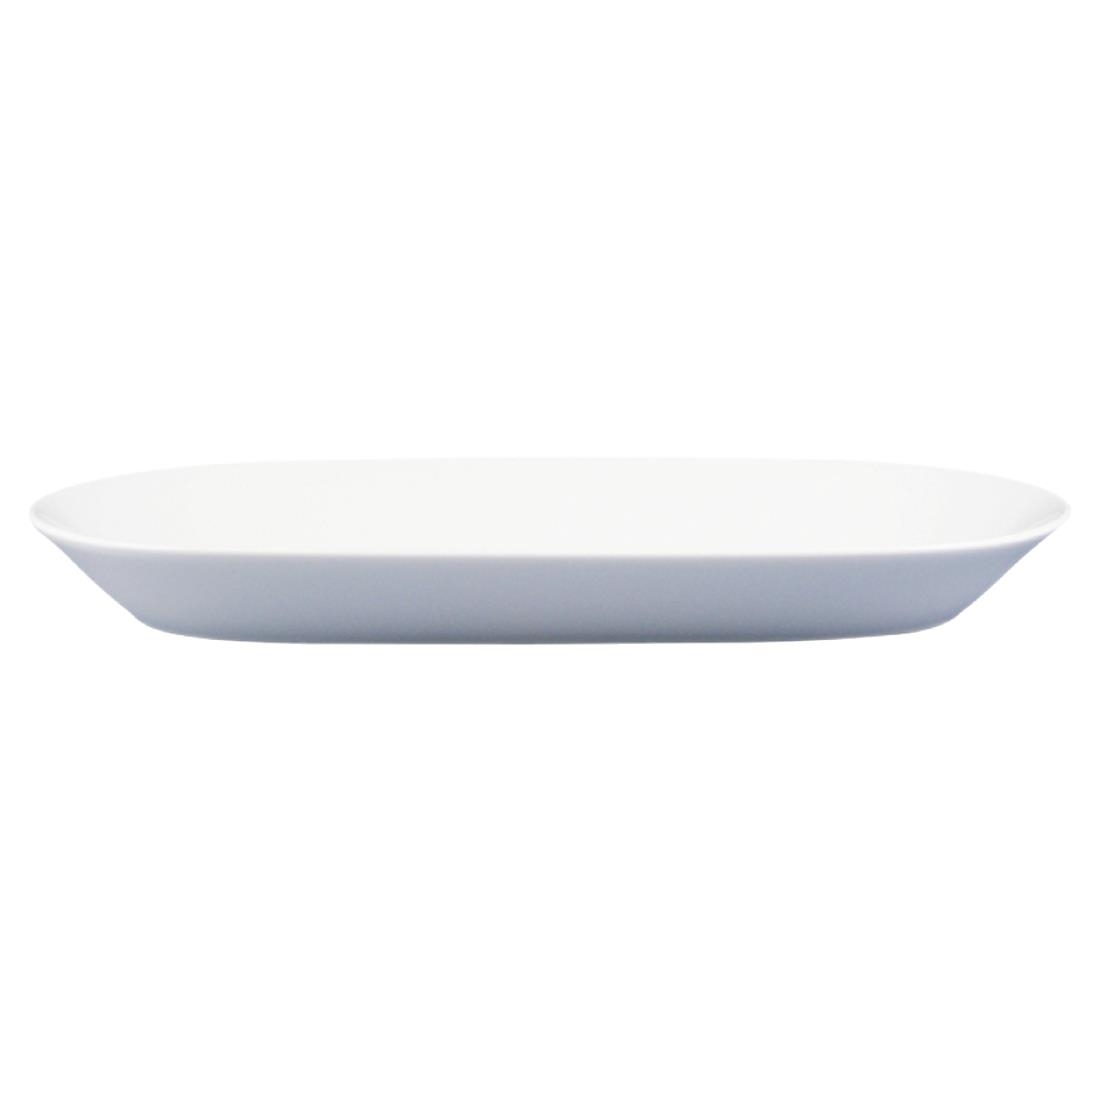 Dudson Flair Rectangular Trays 310mm (Pack of 3)